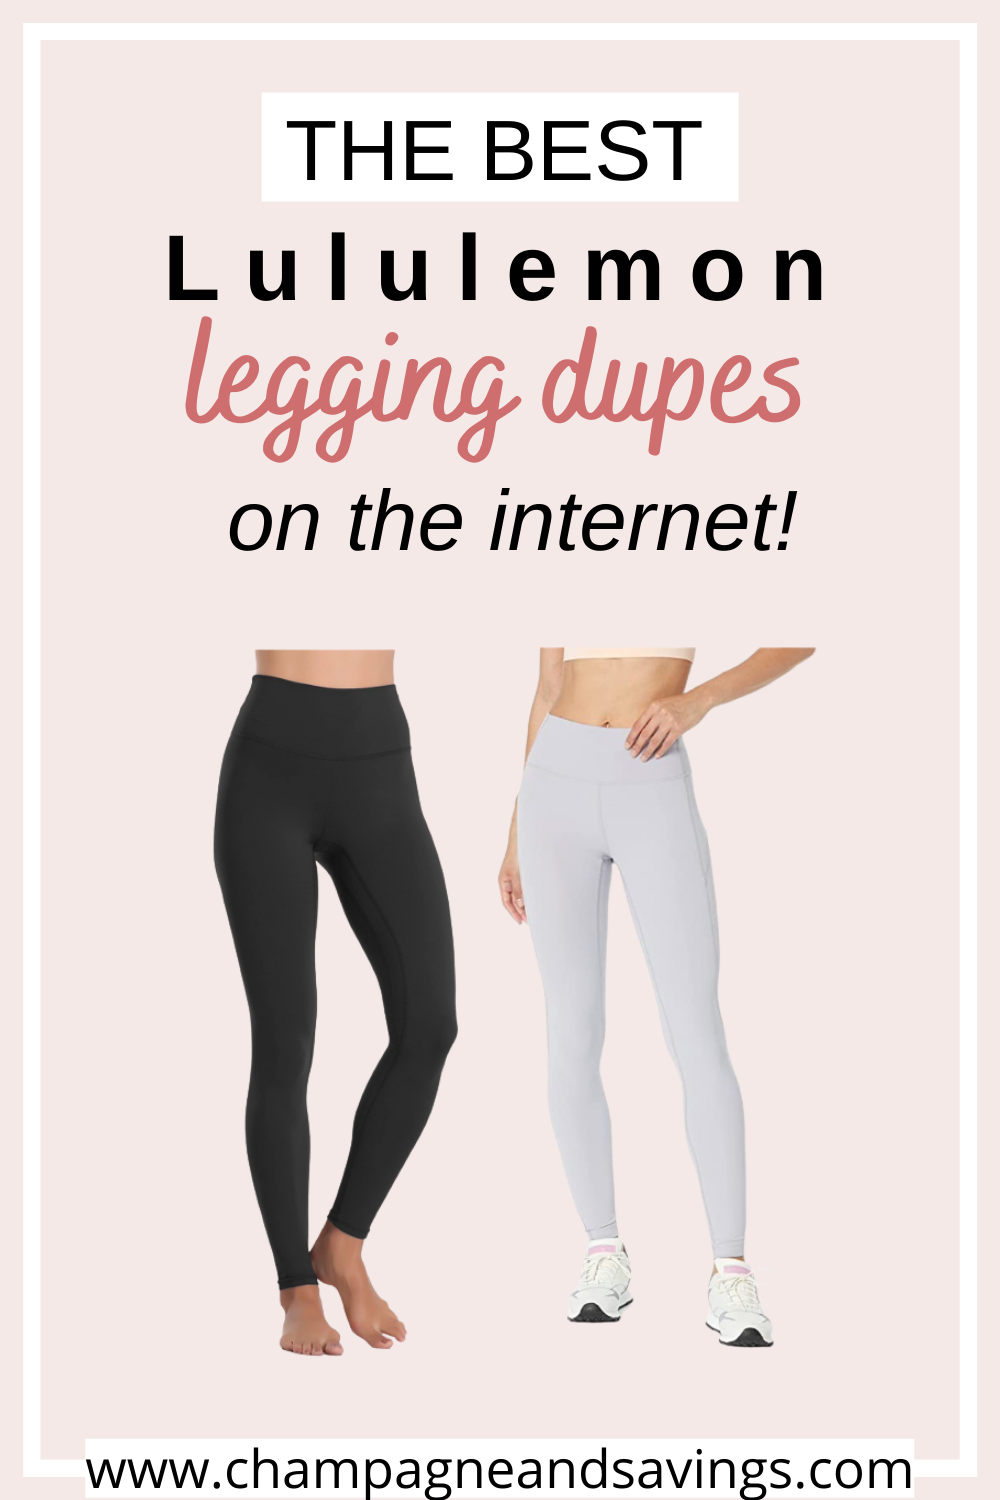 Paragon Fitwear Leggings - Review and Try On // Lululemon Dupes